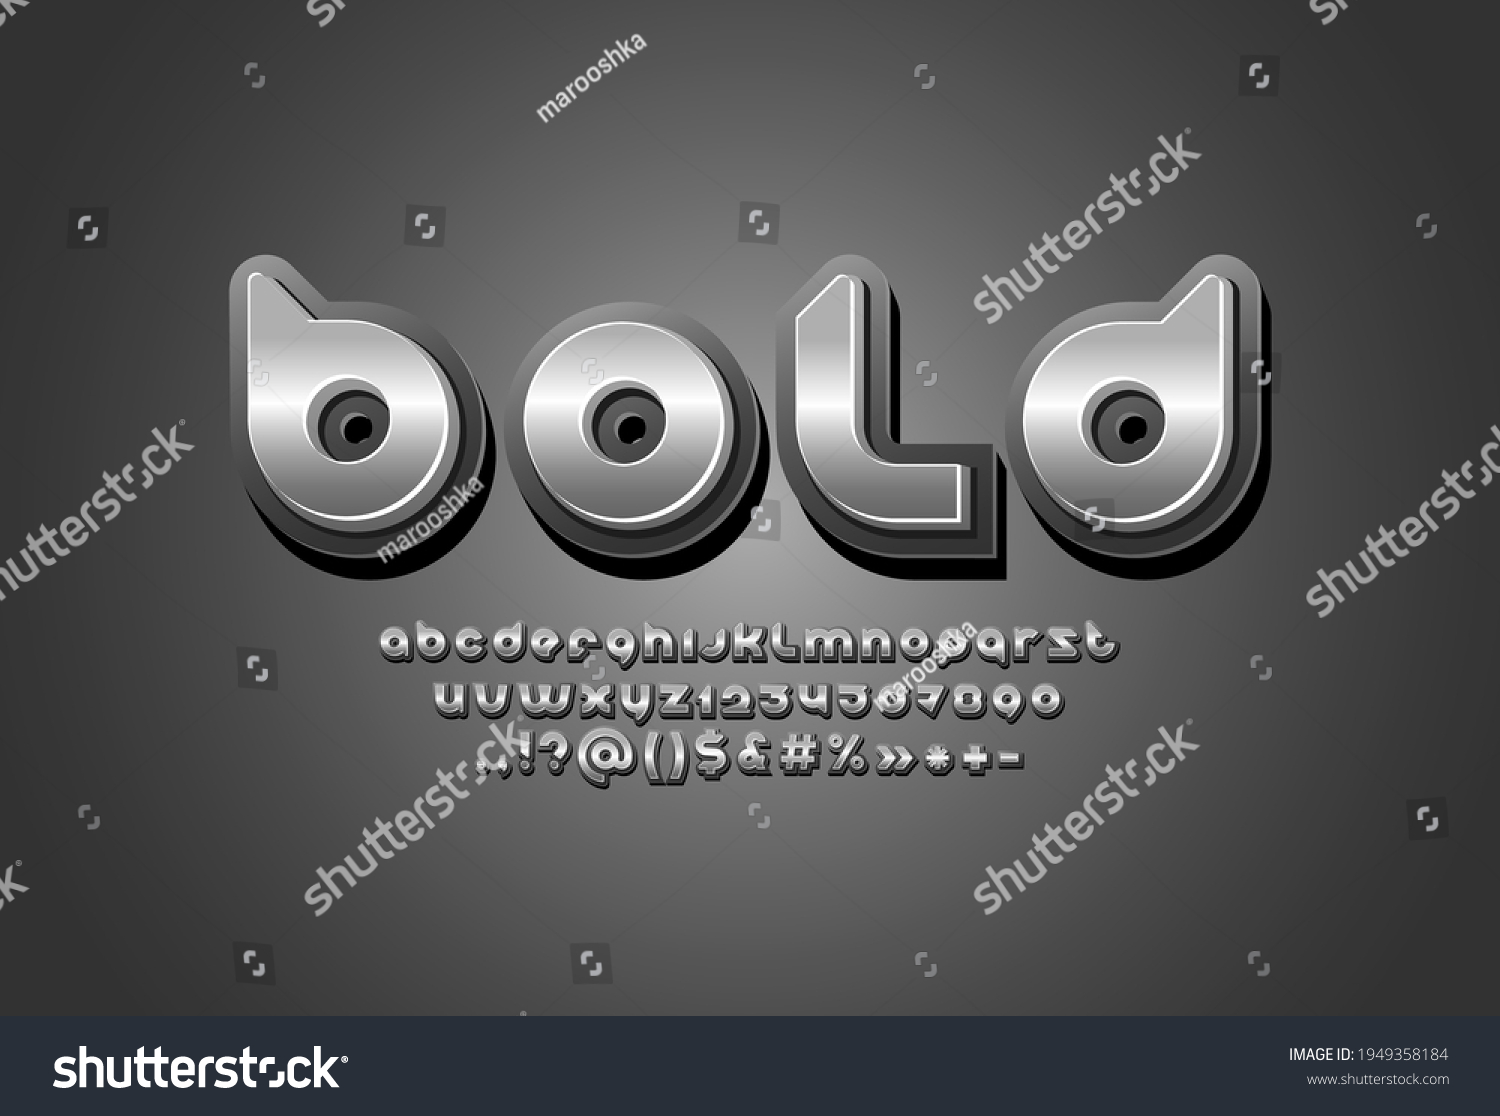 SVG of 3D metal font, metallic rounded alphabet, letters A, B, C, D, E, F, G, H, I, J, K, L, M, N, O, P, Q, R, S, T, U, V, W, X, Y, Z and numbers 0, 1, 2, 3, 4, 5, 6, 7, 8, 9, vector illustration 10eps svg